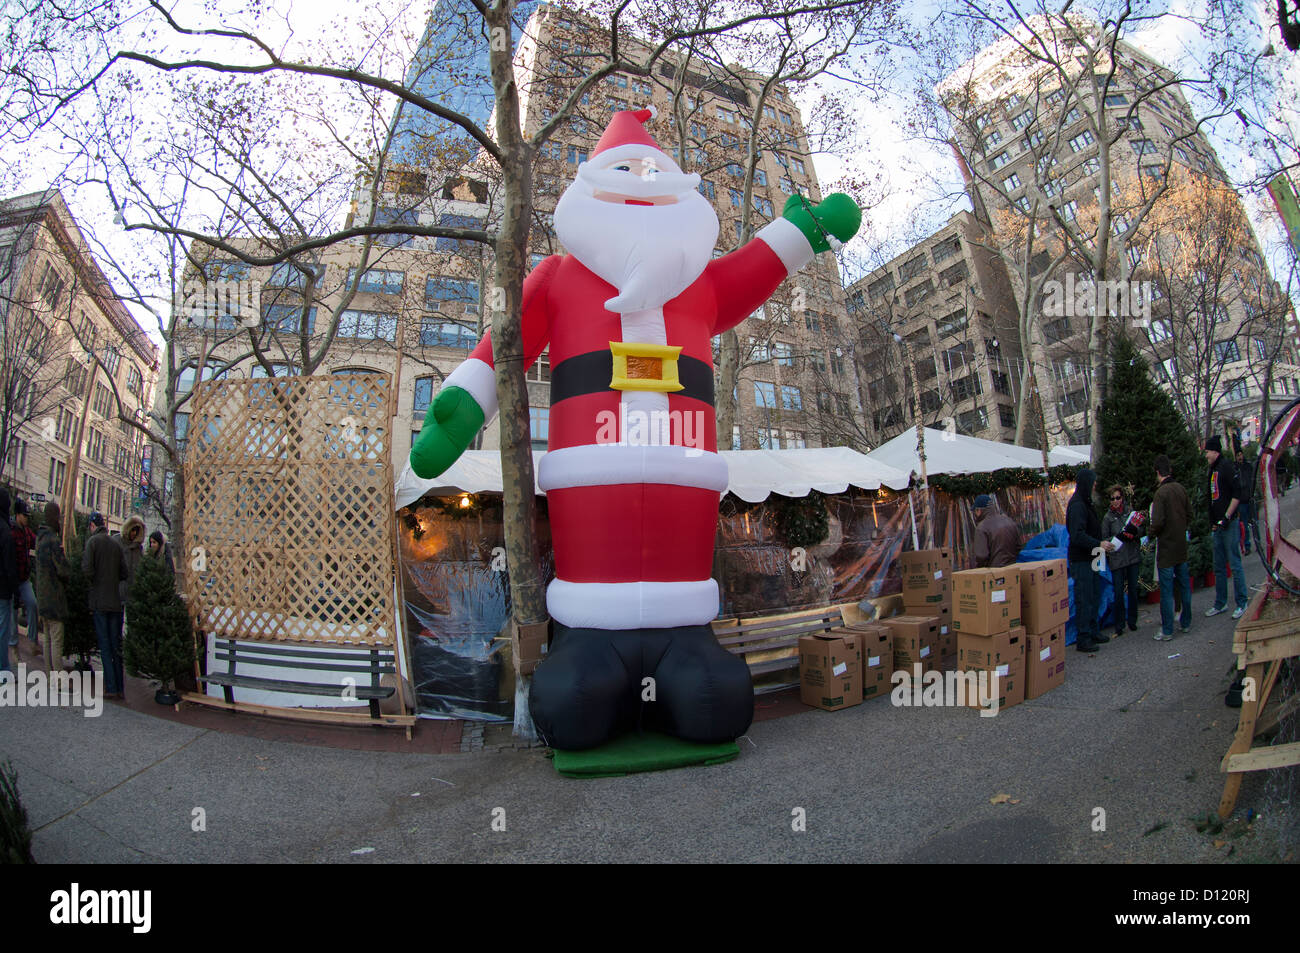 A giant inflated Santa Claus presides over a stand selling Christmas trees in the Soho neighborhood of New York Stock Photo